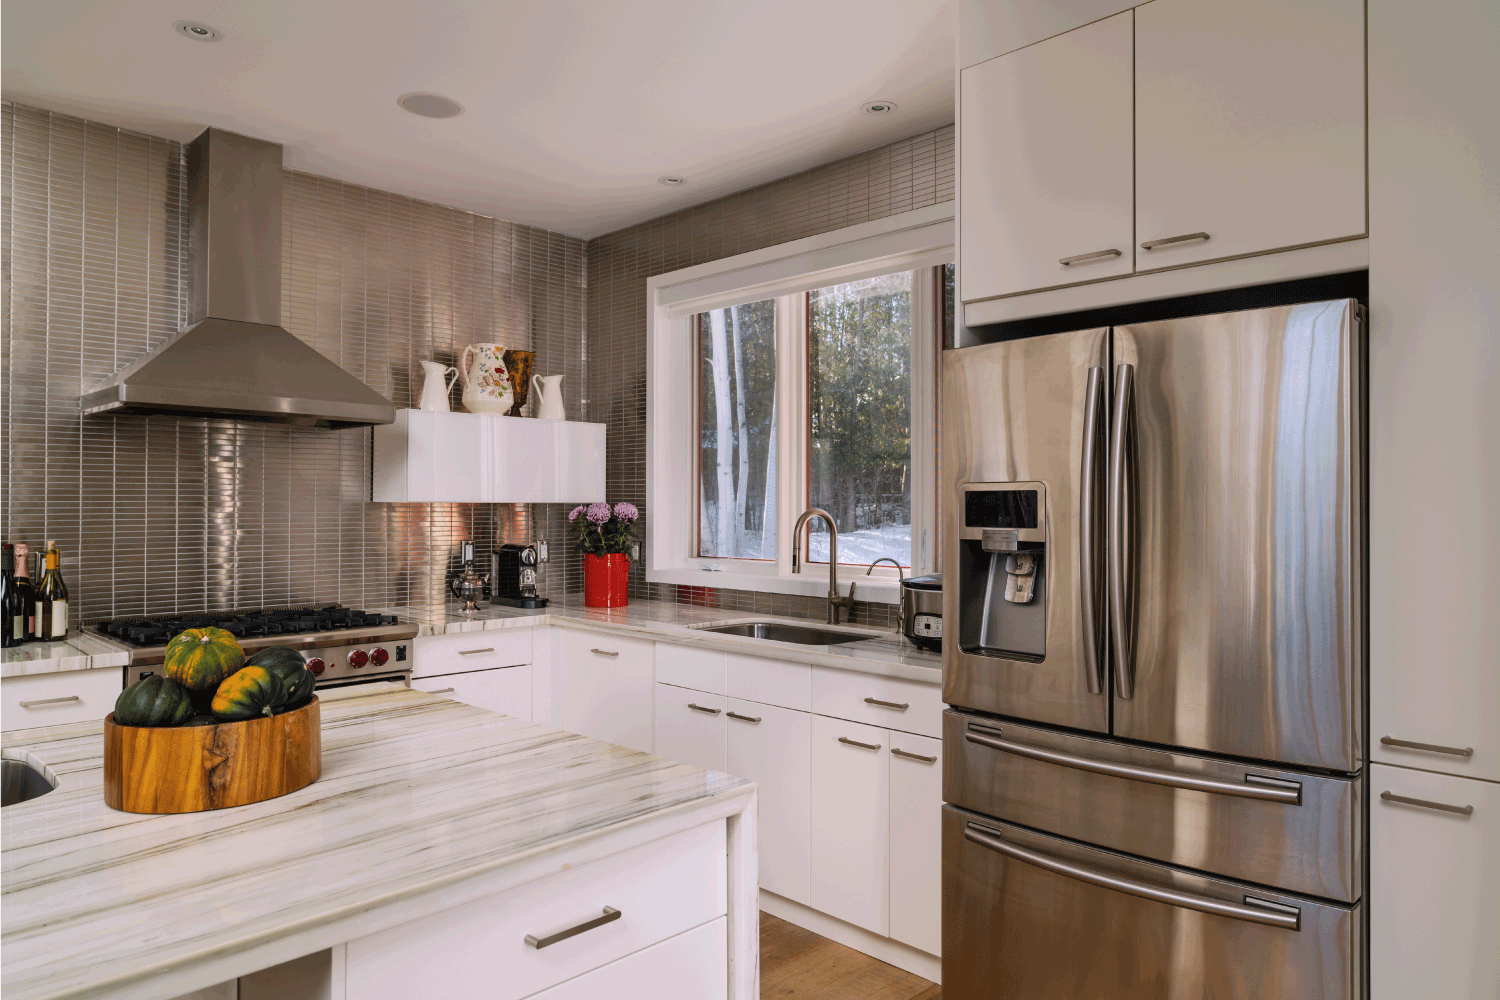 stainless steel refrigerator on a kitchen cabinet in plain white, granite countertops. How To Fill The Gap Between Fridge And Cabinet